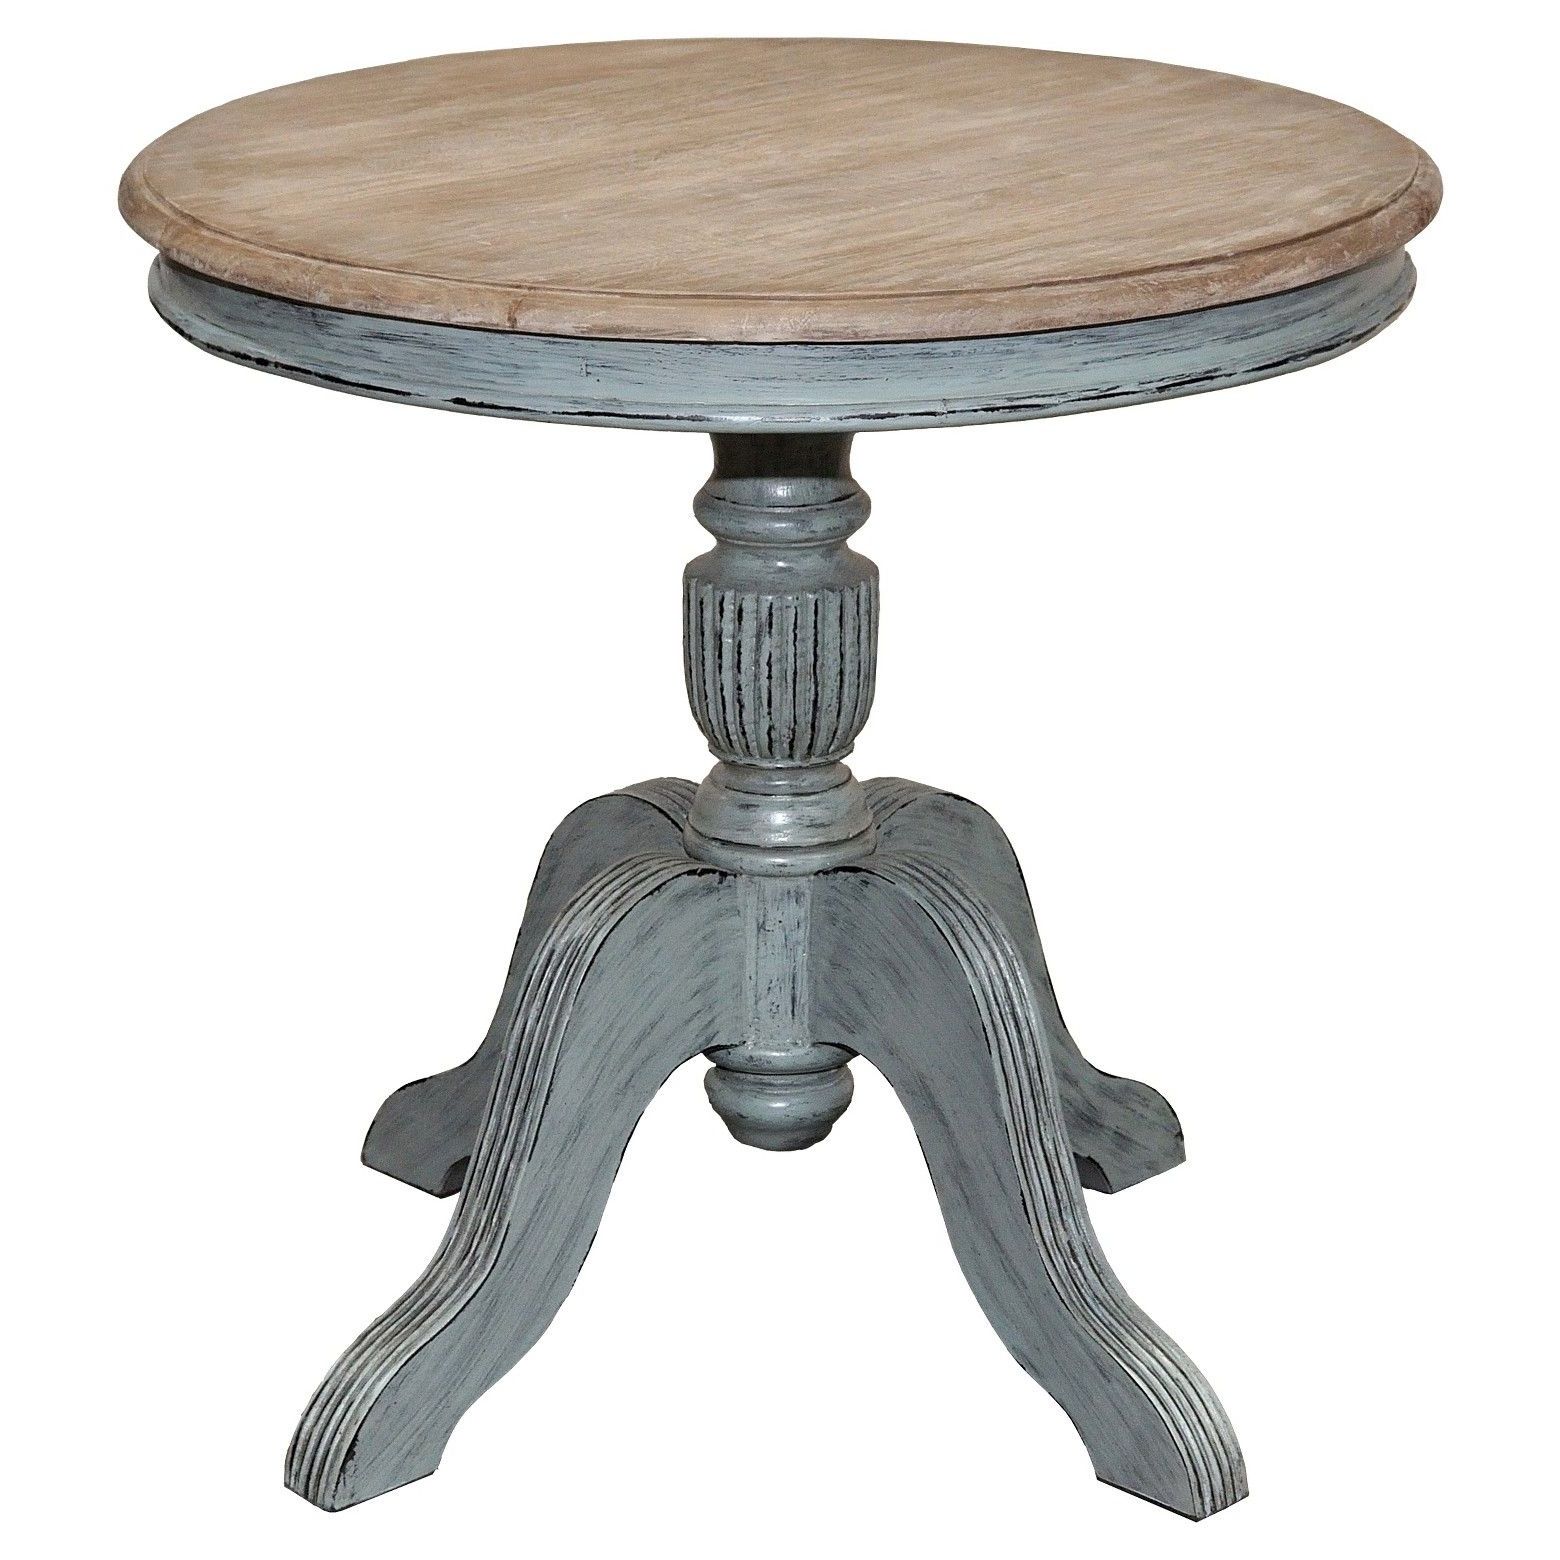 Grady Round Dining Tables For Recent Venezia Round 31 Dining Table Farmhouse Island Blue Base With Rustic (View 7 of 25)